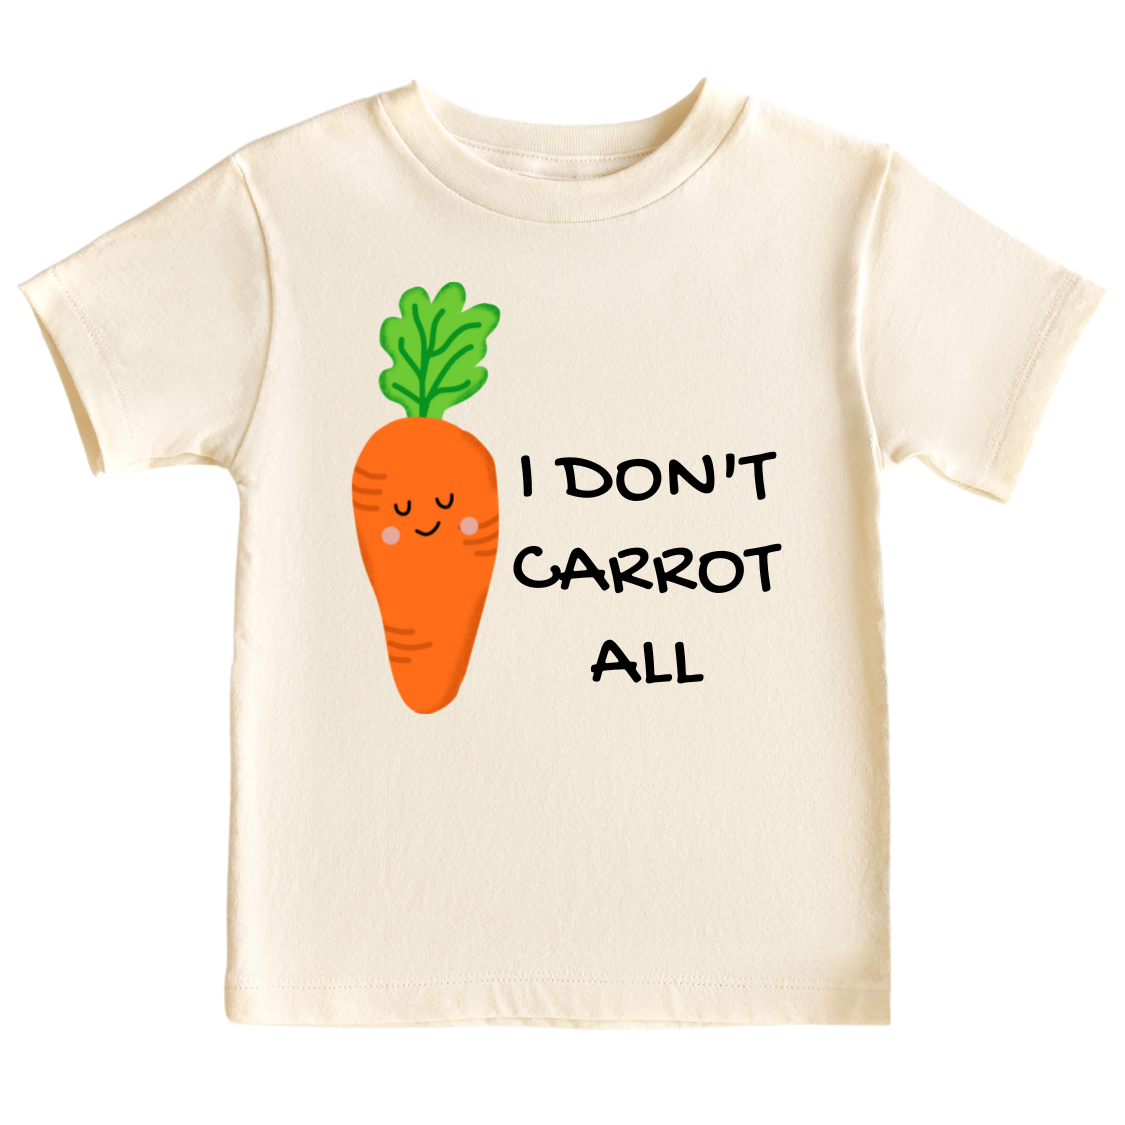 Kids t-shirt with carrot graphic and 'I Don't Carrot All' text. Playful and trendy shirt for children's fashion